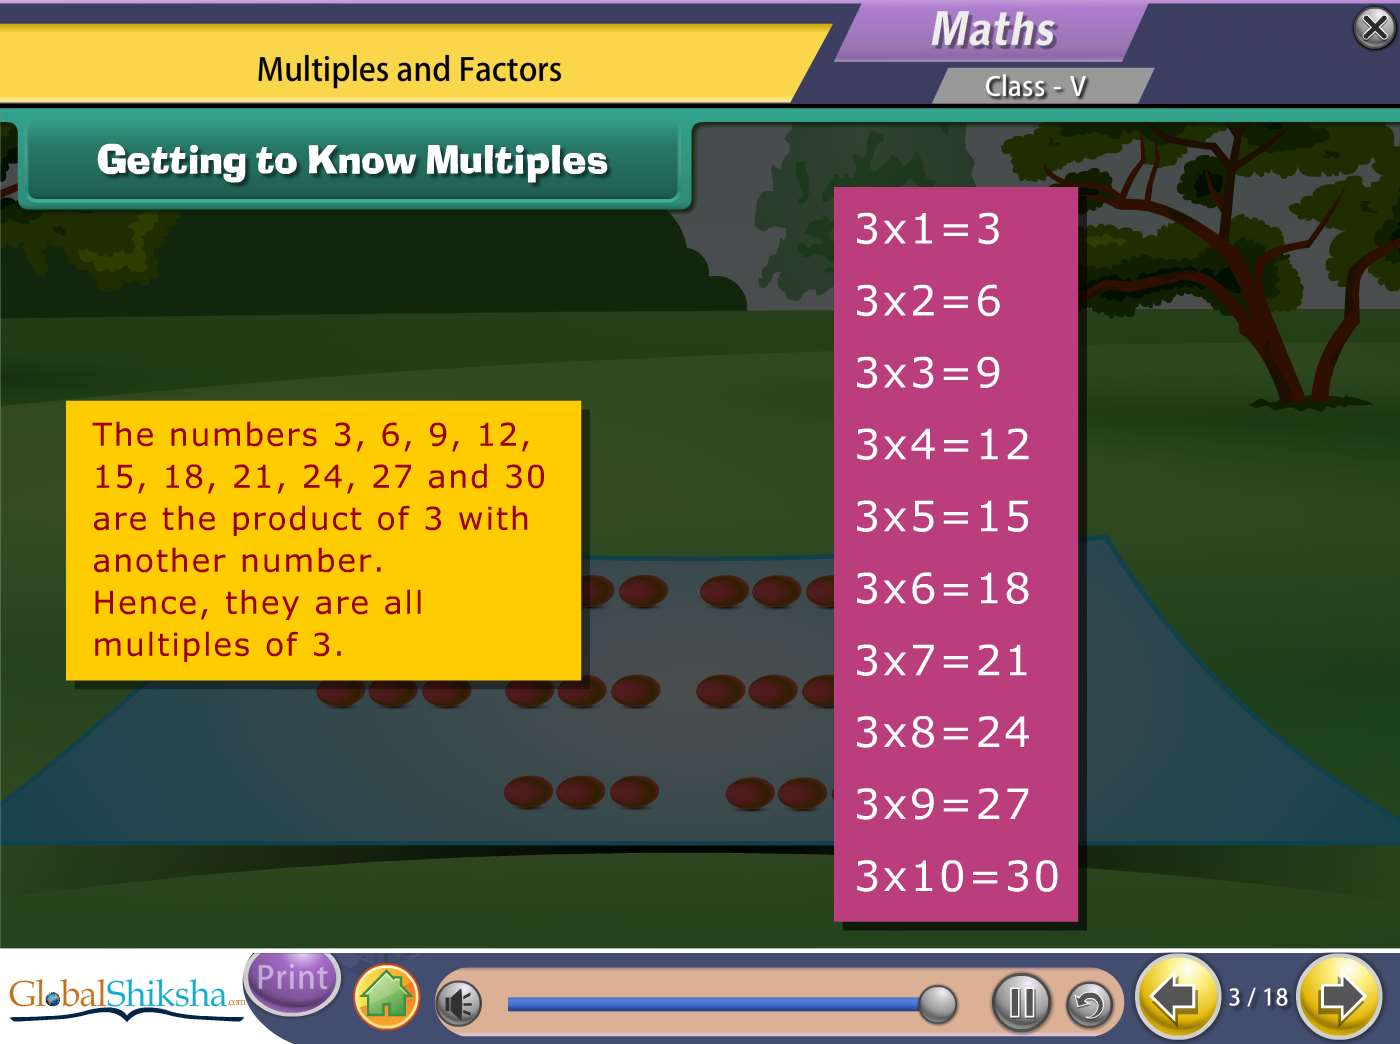 Maharashtra State Board Class 5 Maths & Science Animated Pendrive in English